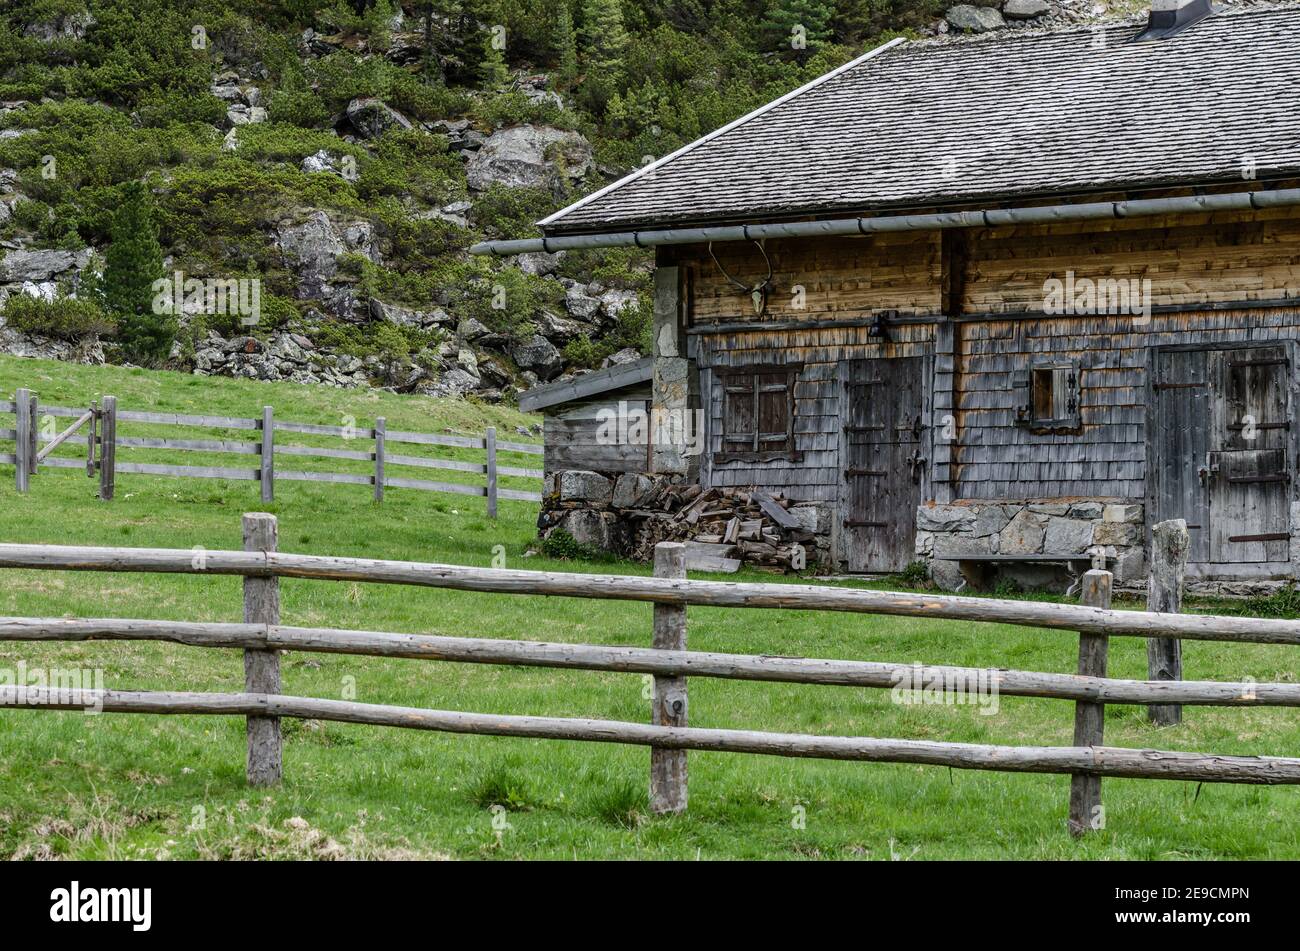 house of wood in the mountains with fence Stock Photo